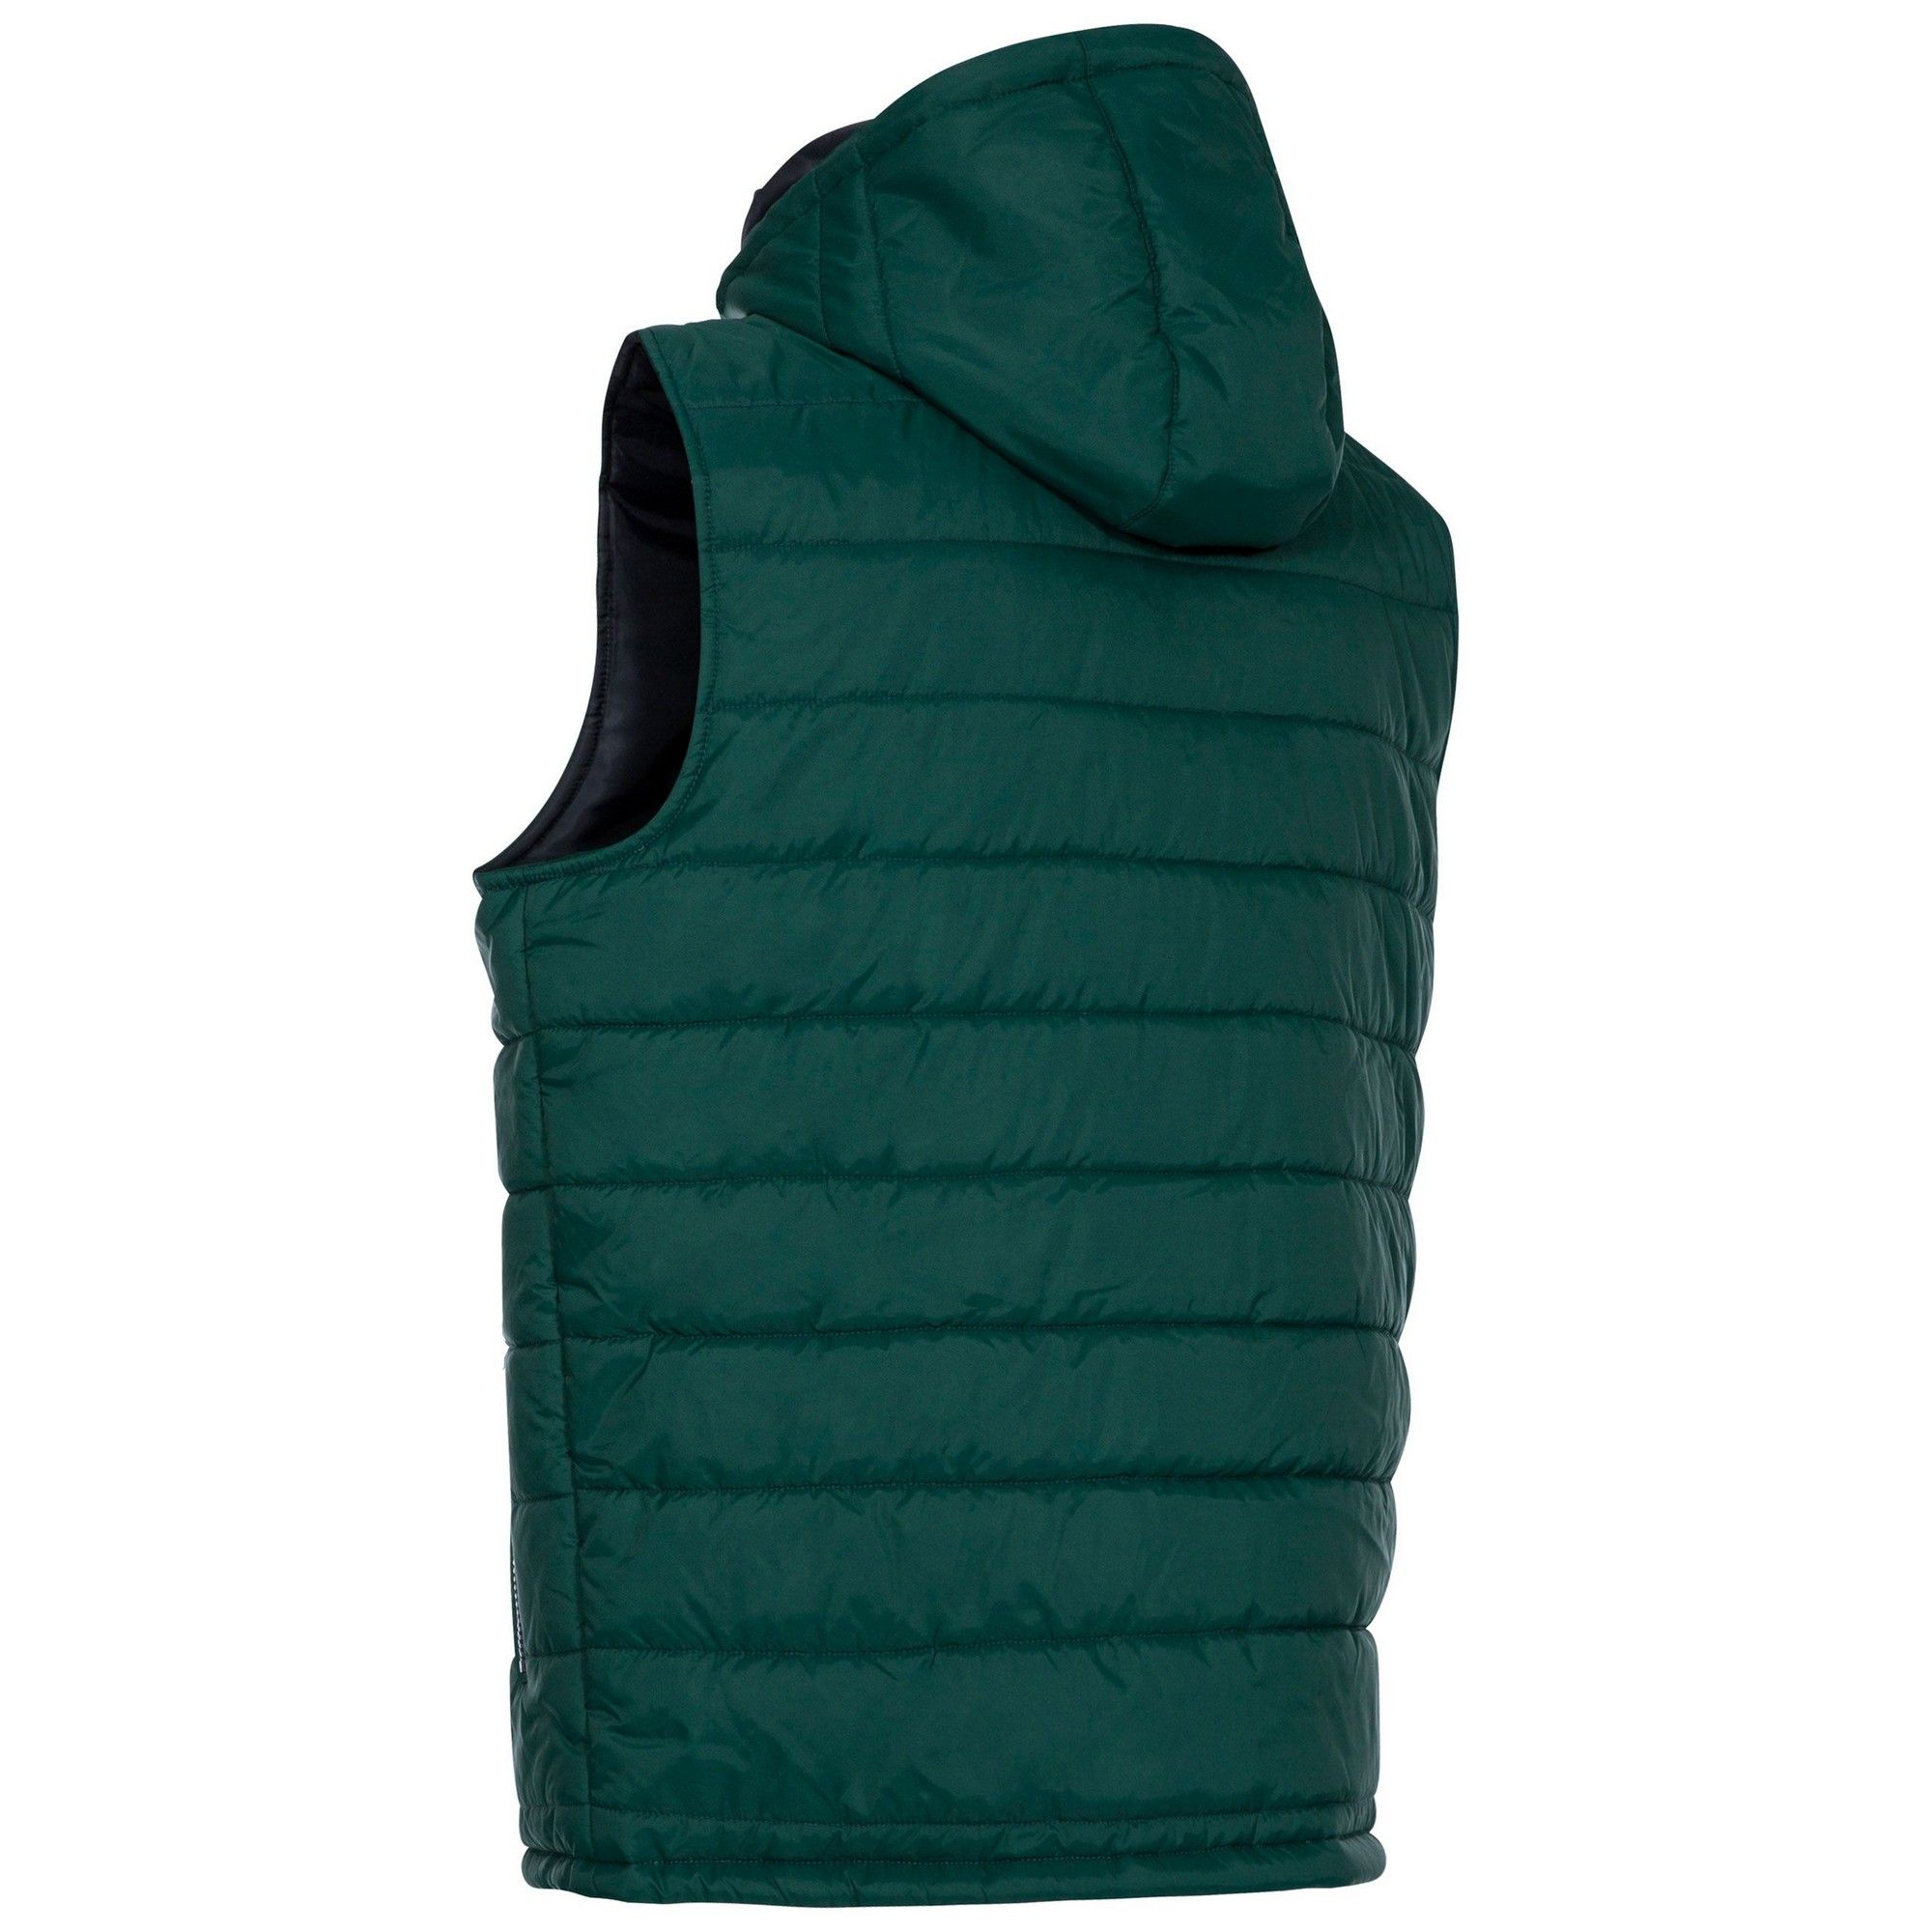 Padded gilet. Adjustable stud off hood. Inner storm flap. 2 zip pockets. Drawcord at hem. Inner pocket. Chin guard. Shell: 100% Polyamide, AC coating, Lining: 100% Polyester, Filling: 100:% Polyester. Trespass Mens Chest Sizing (approx): S - 35-37in/89-94cm, M - 38-40in/96.5-101.5cm, L - 41-43in/104-109cm, XL - 44-46in/111.5-117cm, XXL - 46-48in/117-122cm, 3XL - 48-50in/122-127cm.